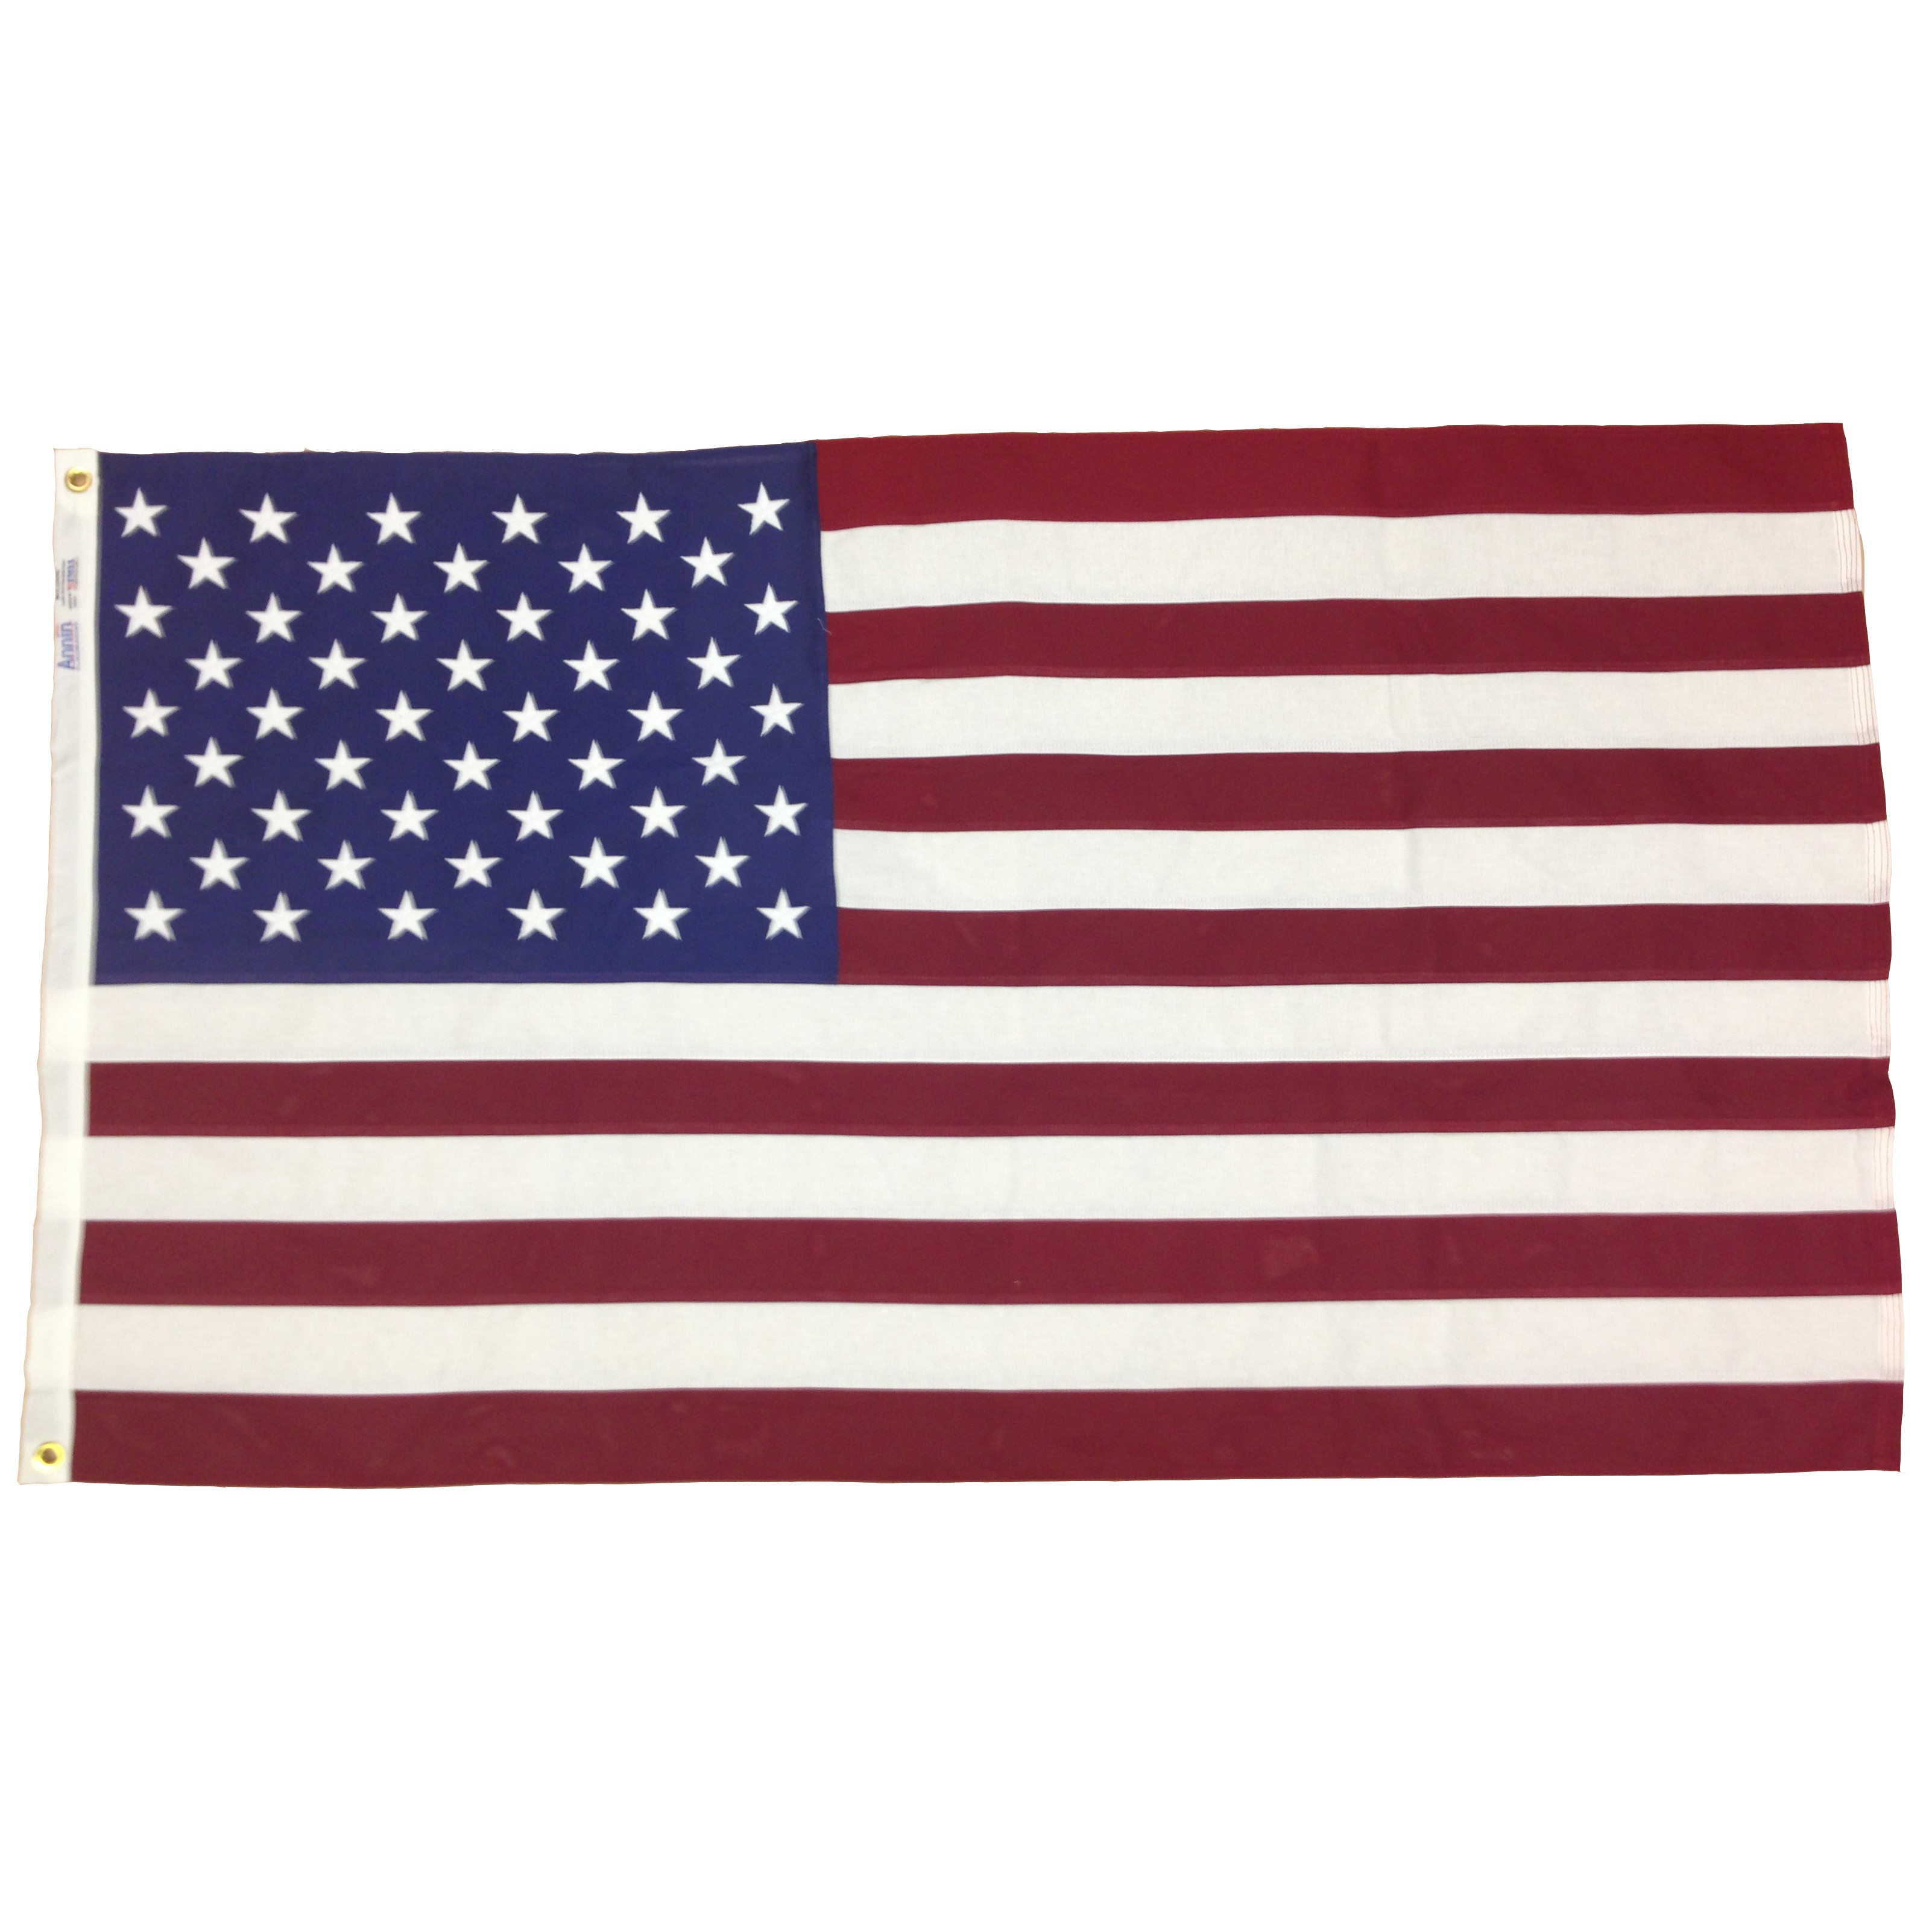 Quality American Flags Made in the USA | Flag Lady USA